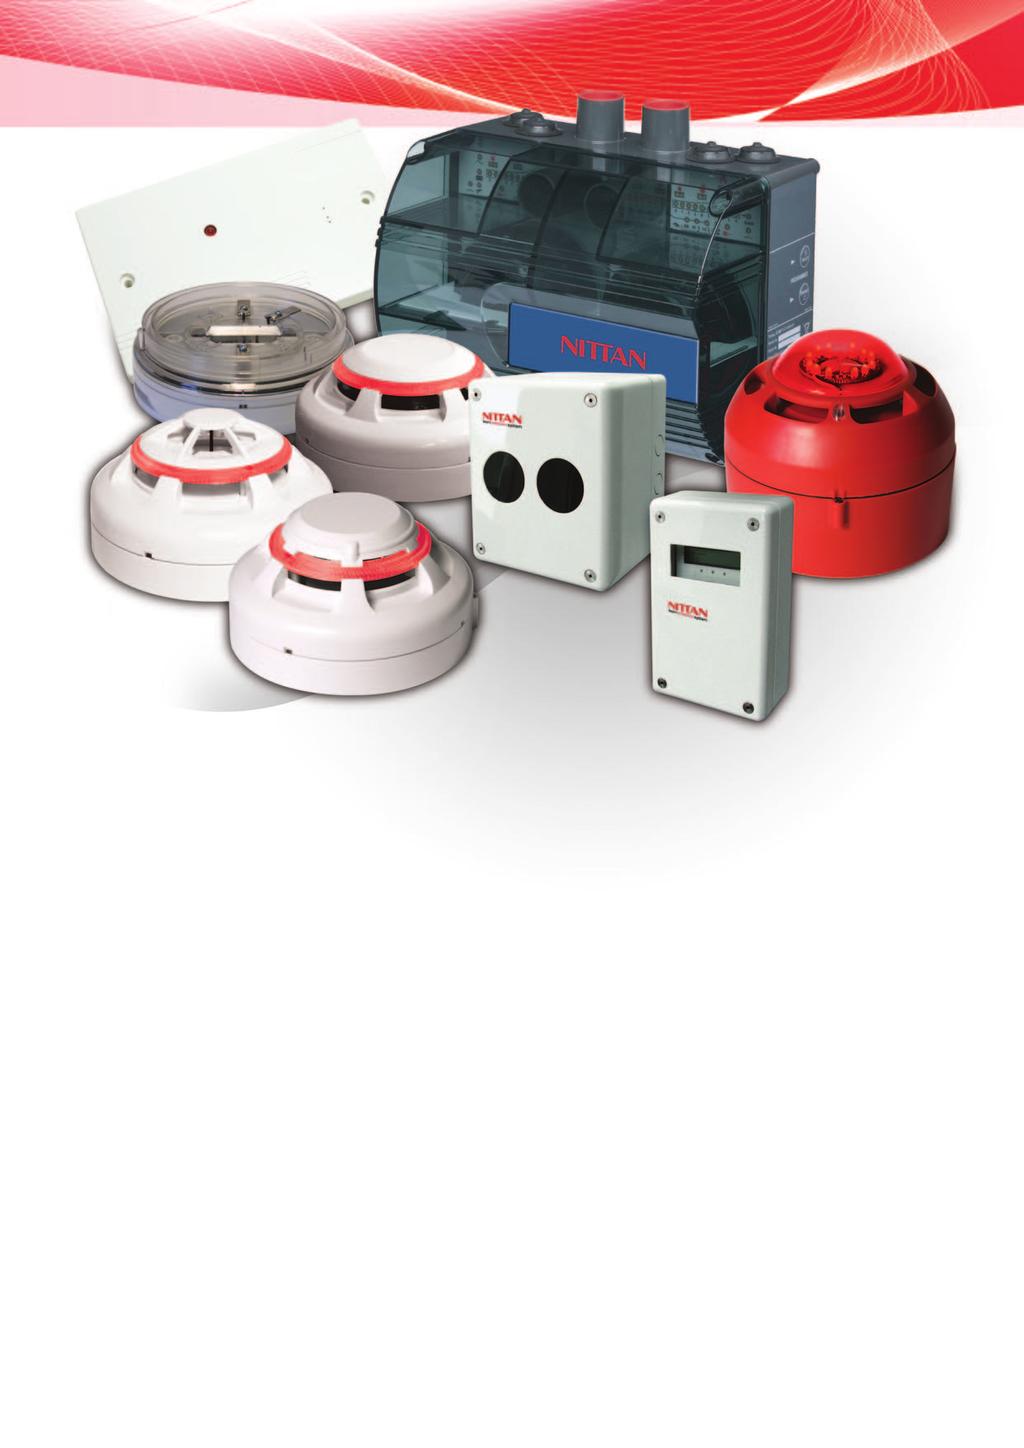 Addressable Fire System Designed and engineered to Marine standards - the highest available - Nittan s Evolution Analogue Addressable range combines extremely reliable fire detection with exceptional